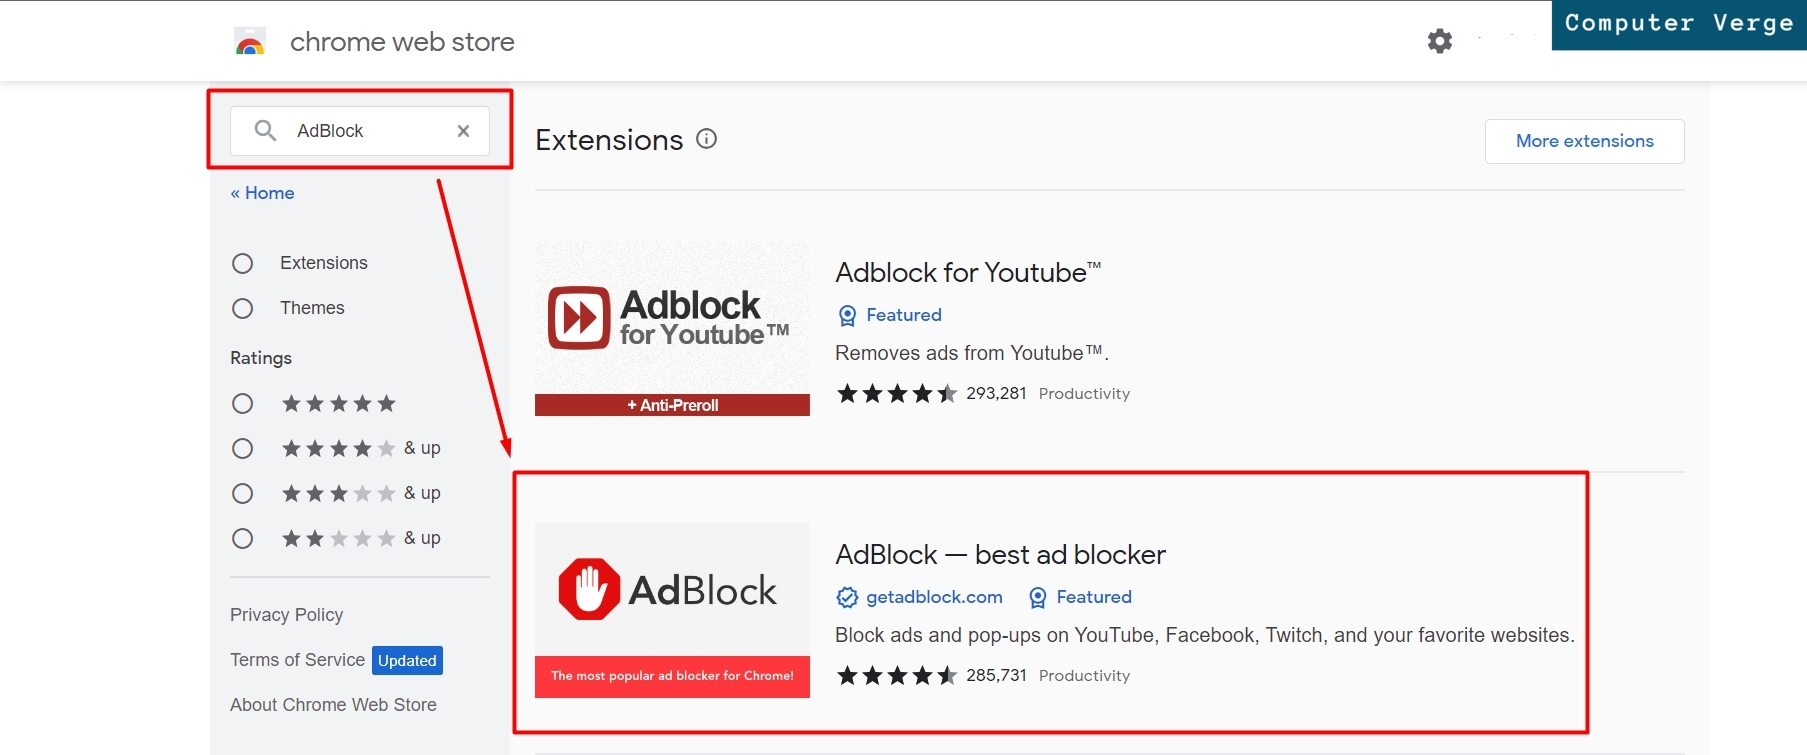 Search for 'AdBlock' and click on the desired extension.